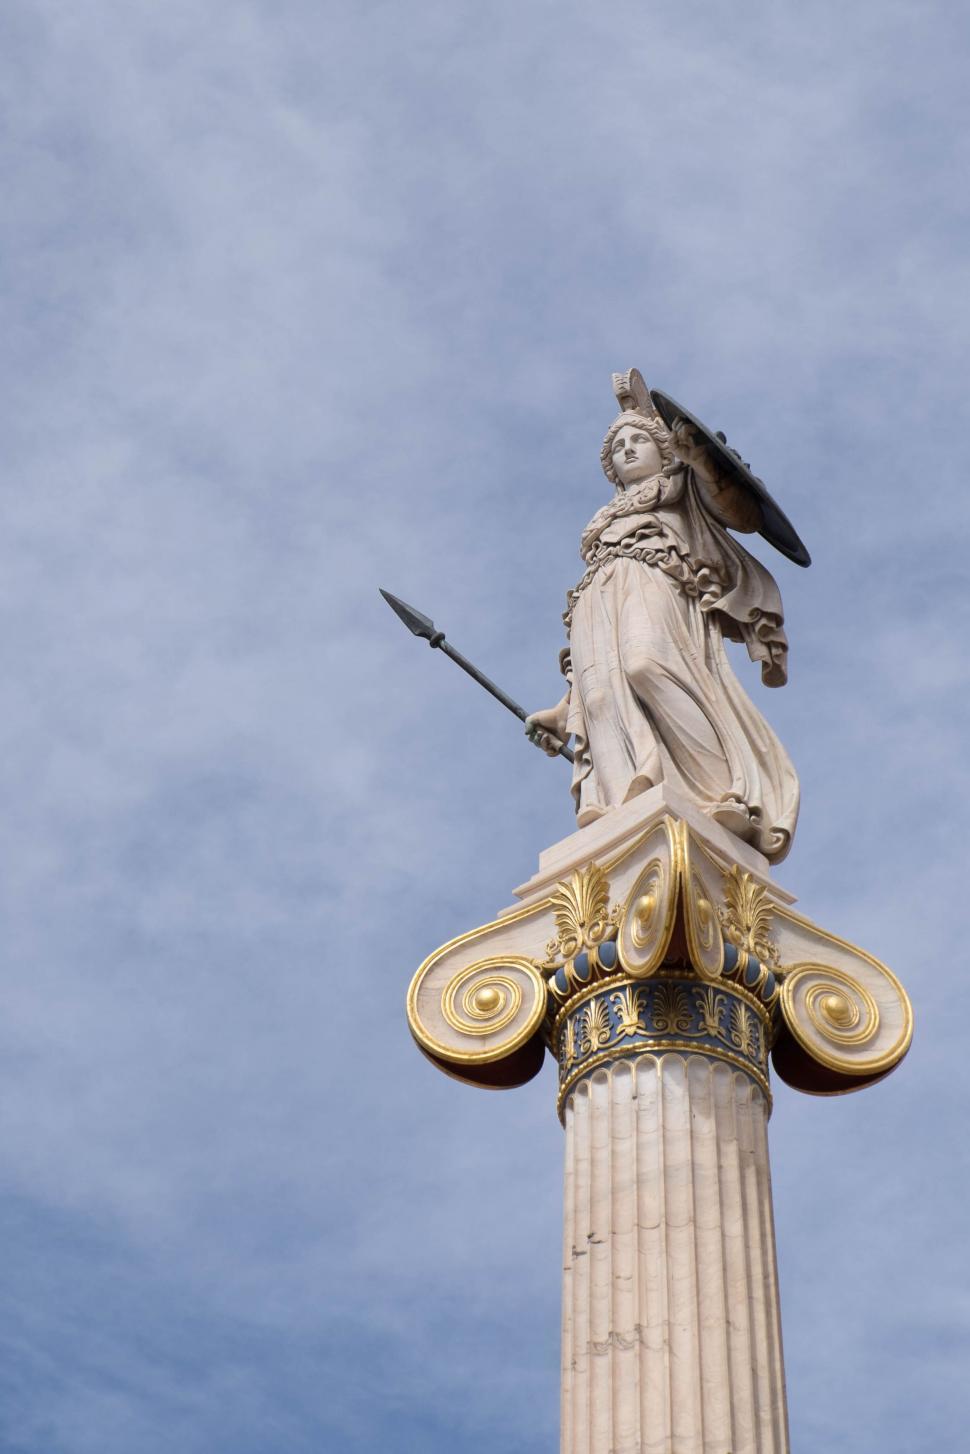 How the Goddess Athena Helped Hercules